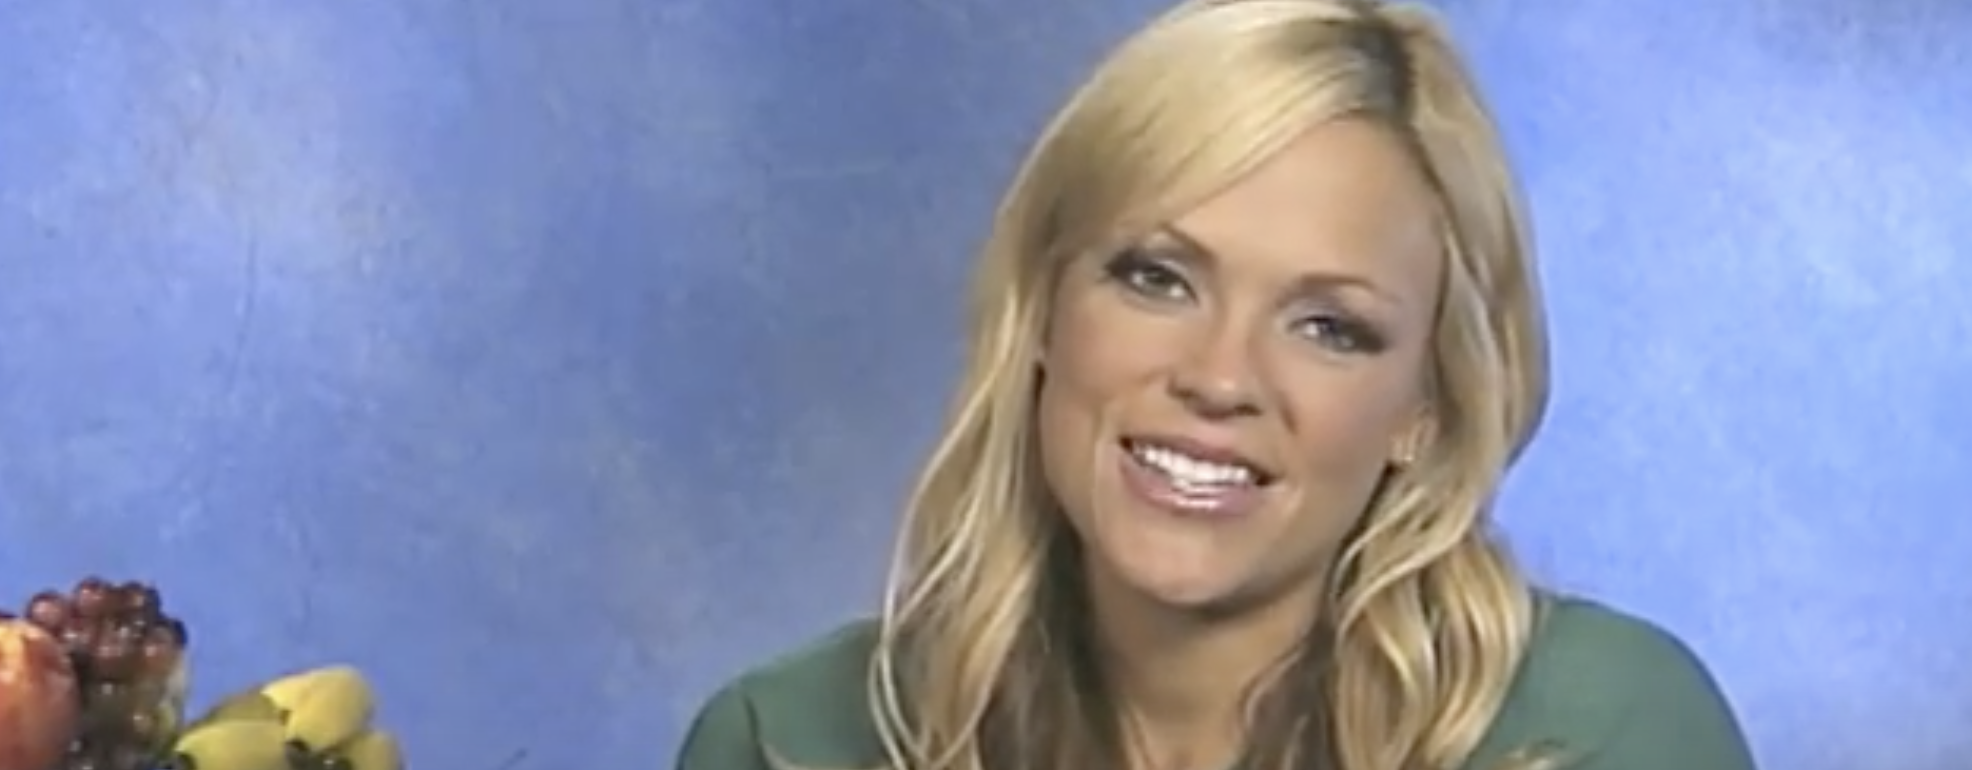 Softball Star Jennie Finch Fighting for Olympics to Reinstate her Sport